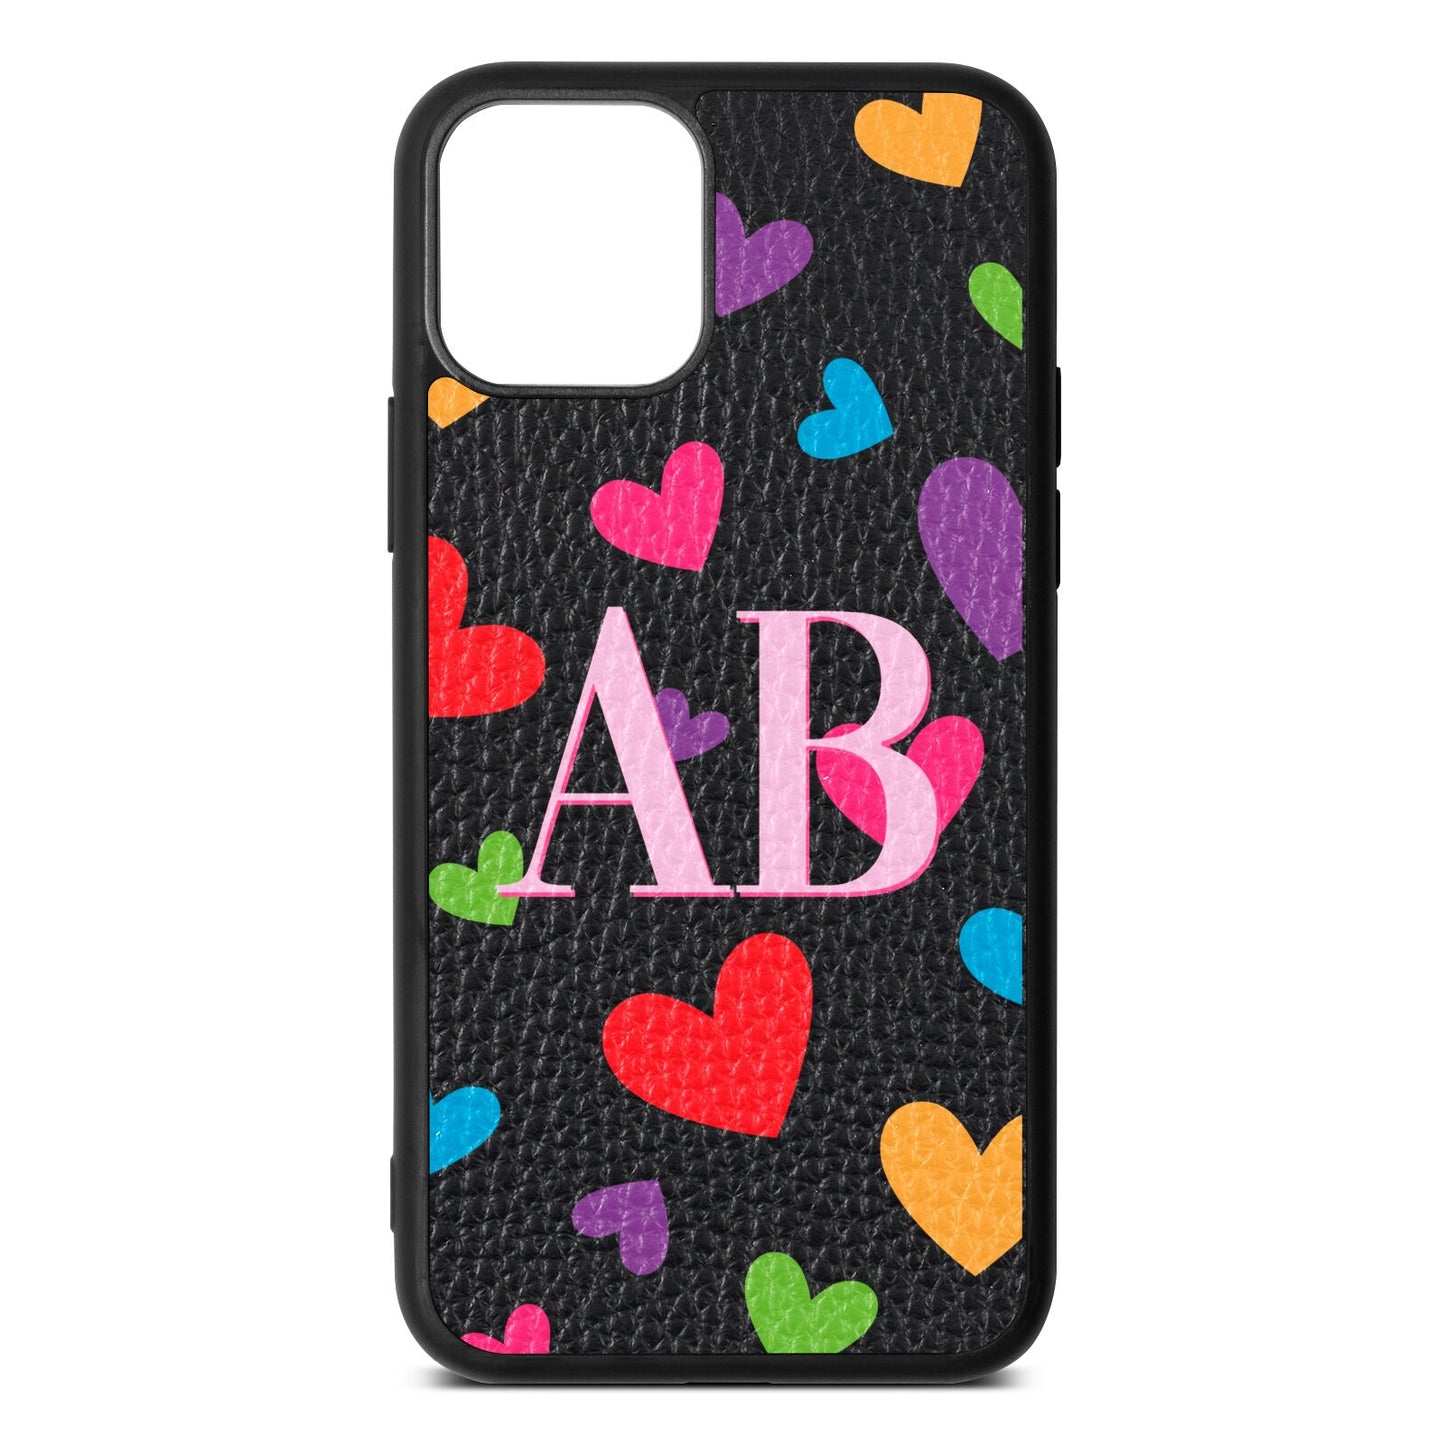 Contrast Initials Heart Print Black Pebble Leather iPhone 11 Pro Case